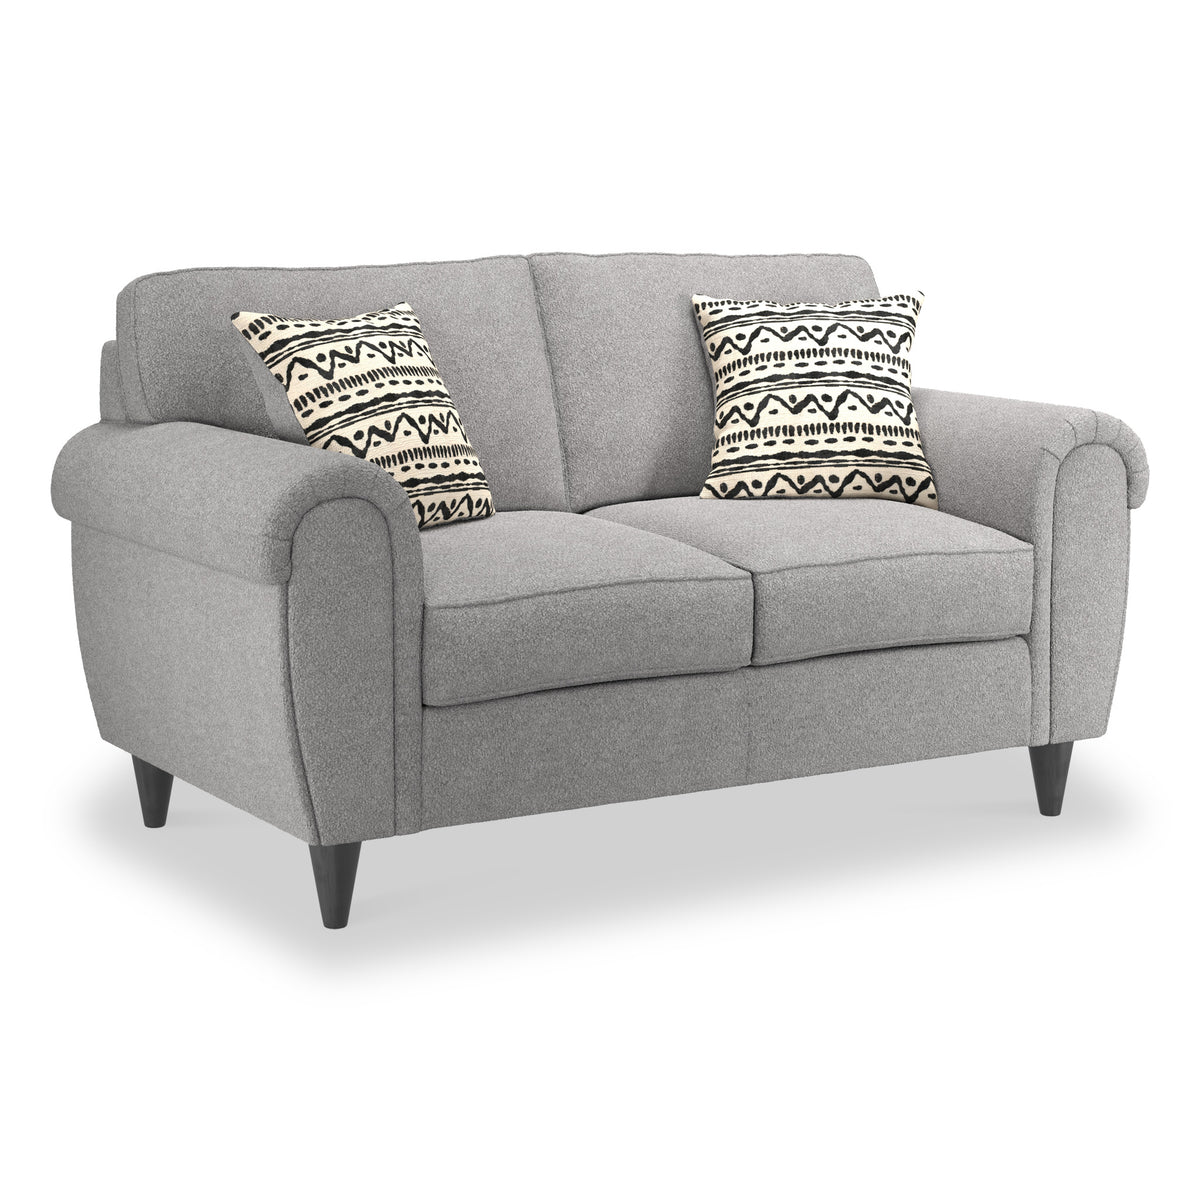 Jessie Grey Boucle 2 Seater Sofa from Roseland Furniture